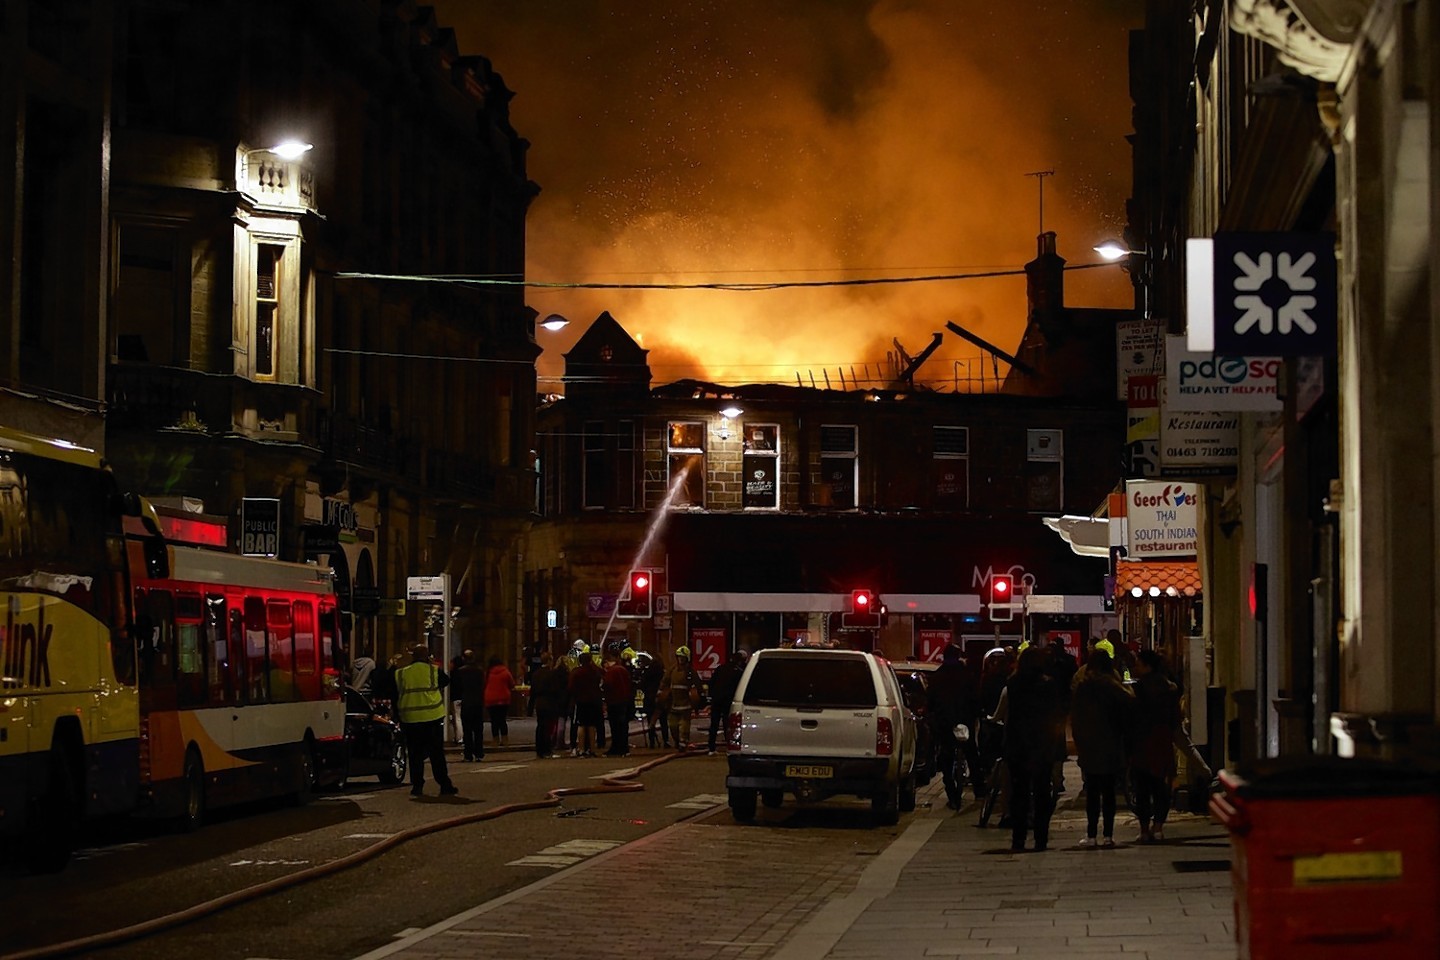 The fire took hold at around 10pm on Wednesday night